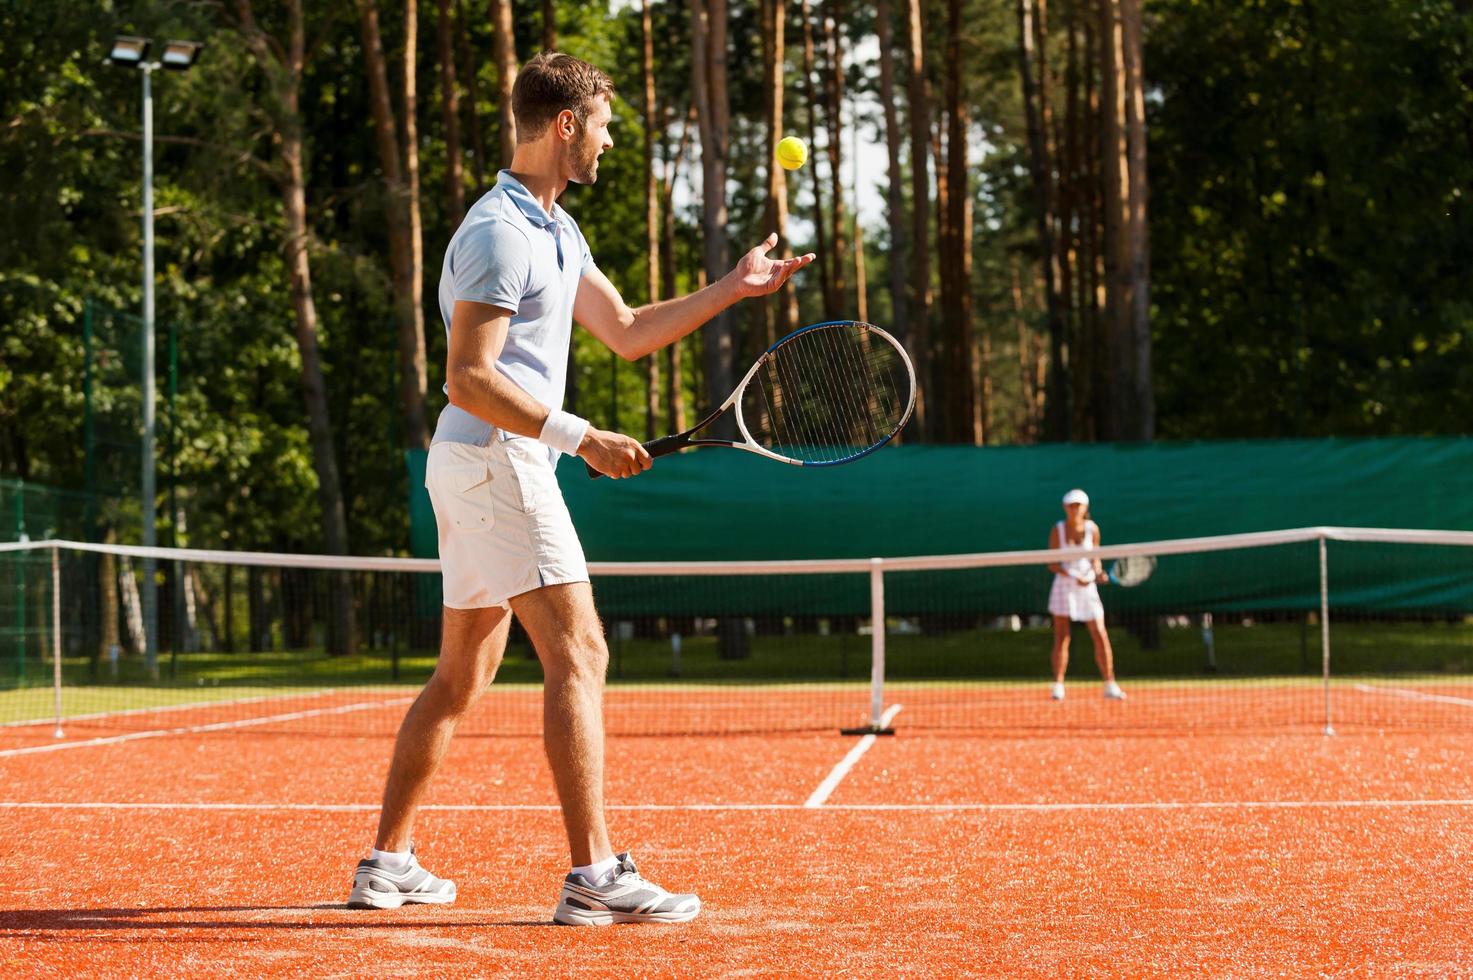 Preparing to his best serve. Full length of man and woman playing tennis on tennis court photo